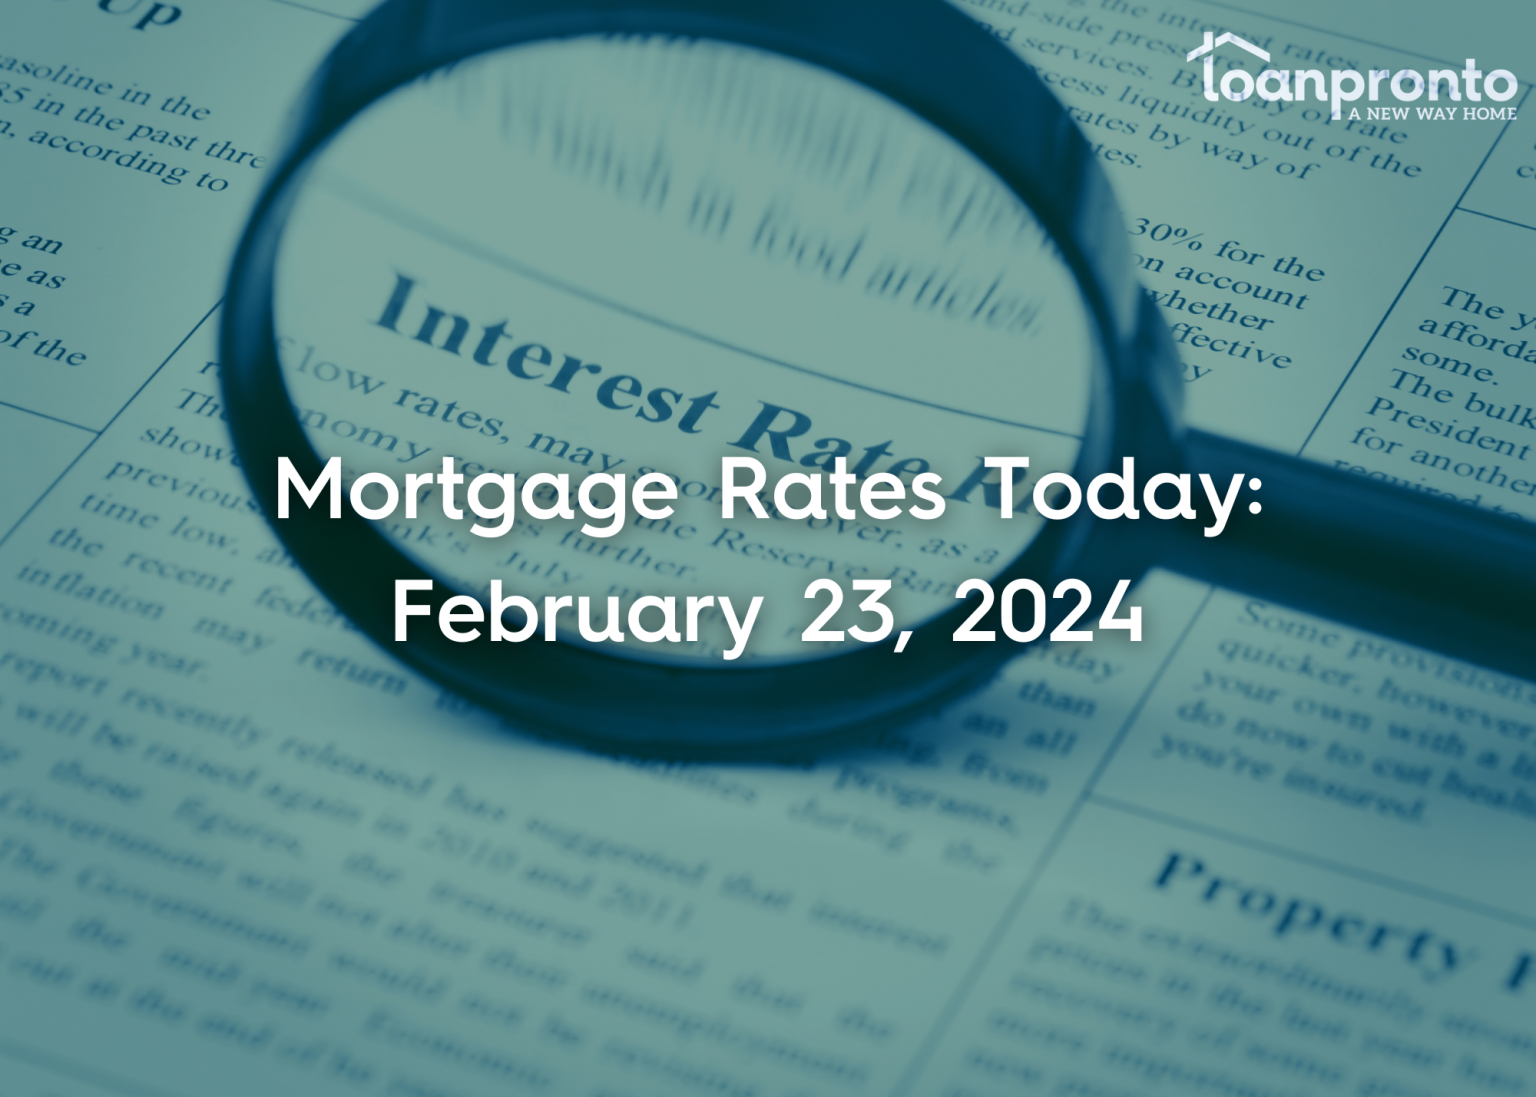 mortgage rates today: feb 23, 2024. Rates offer stability. CHanges anticipated with upcoming jobs report